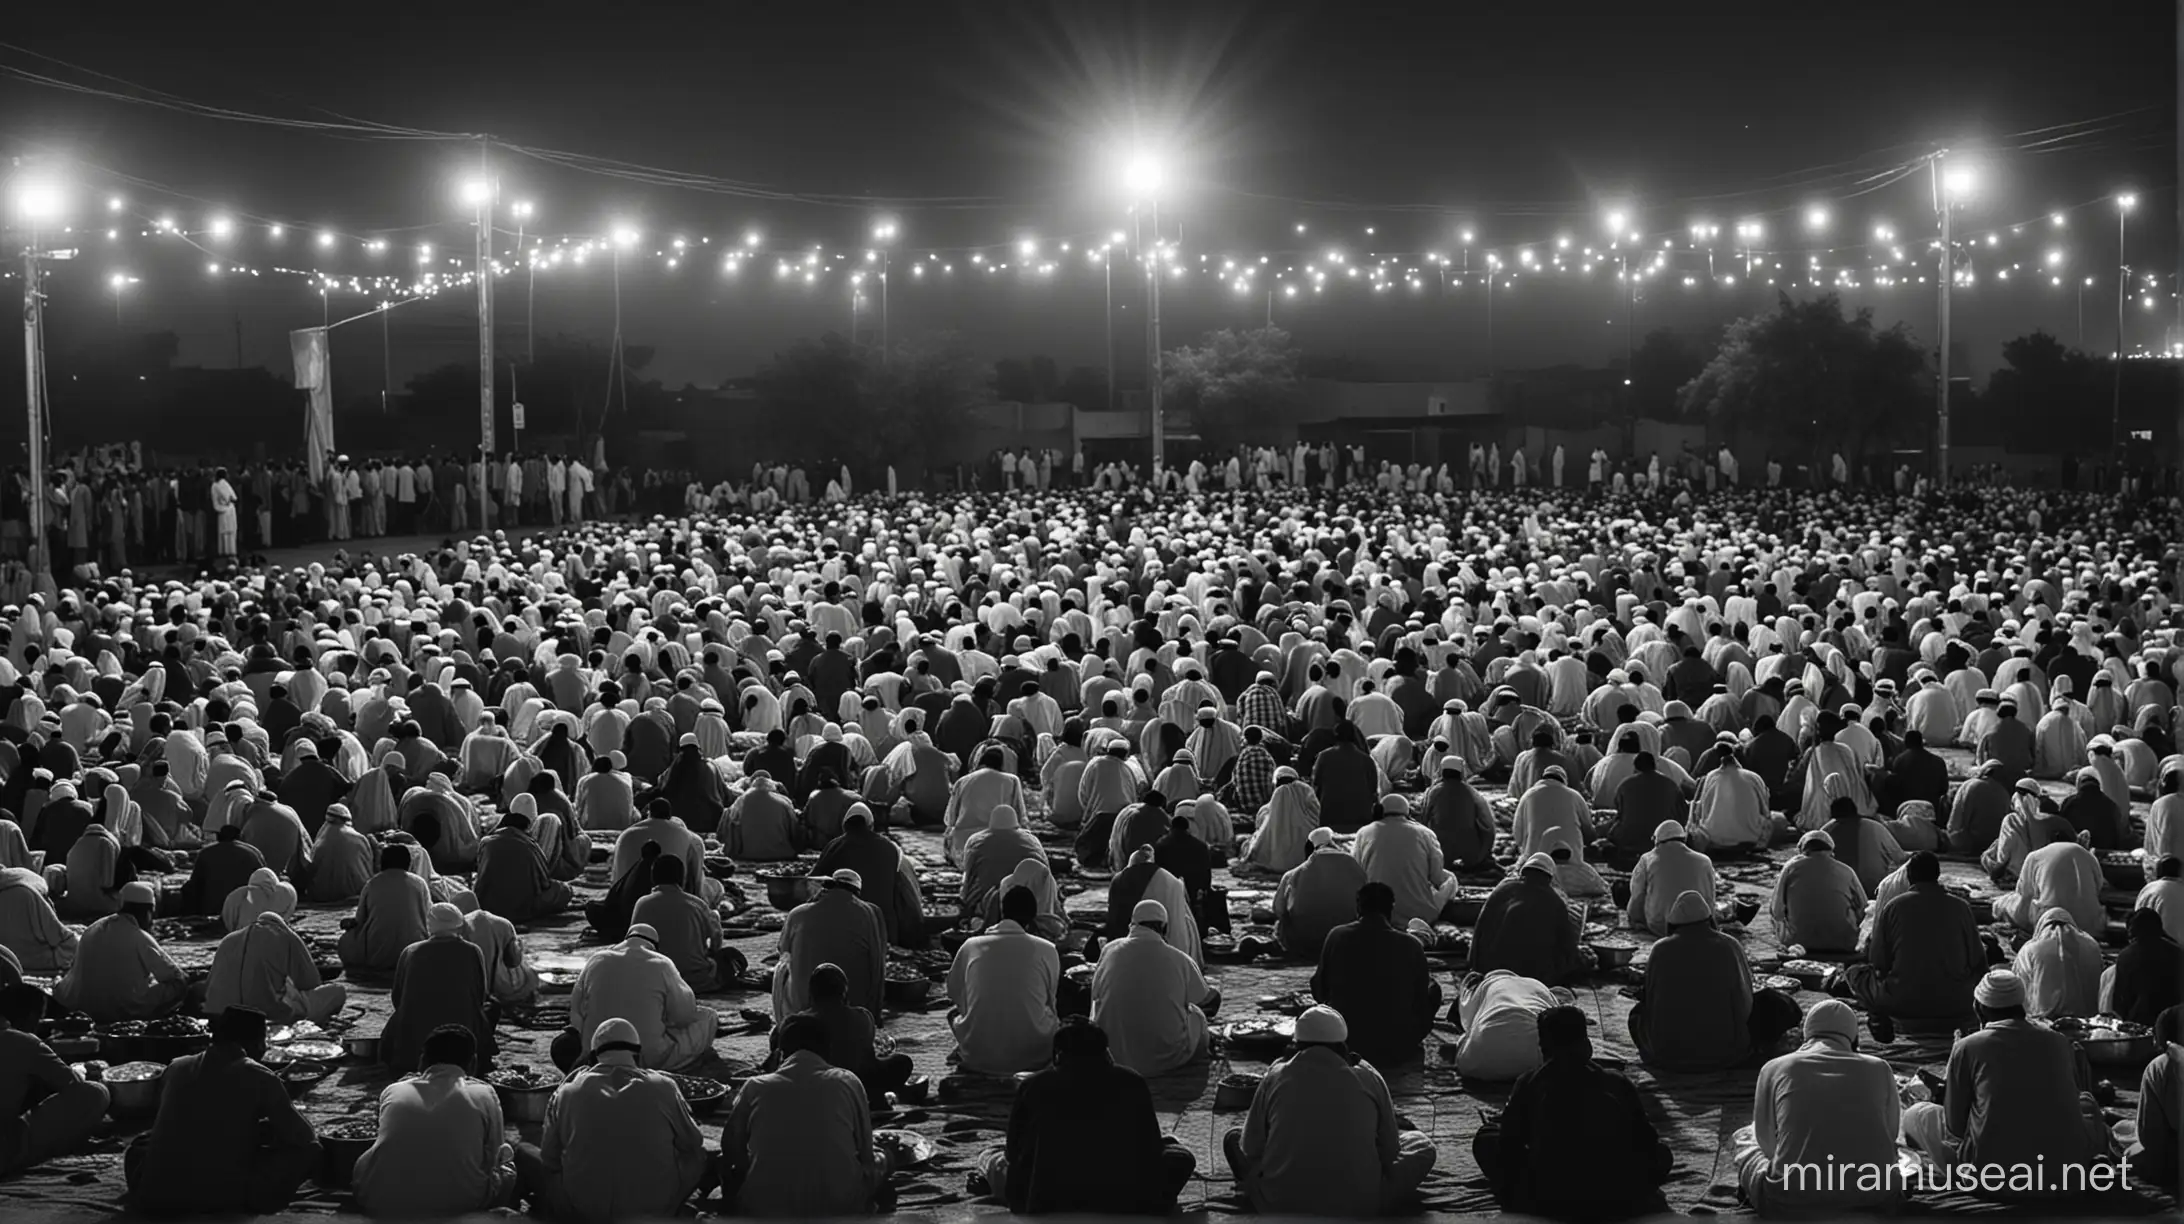 A dark landscape image of pakistan society deeply connected to islam, everyone is breaking thier fast in ramdan and all sitting togather





